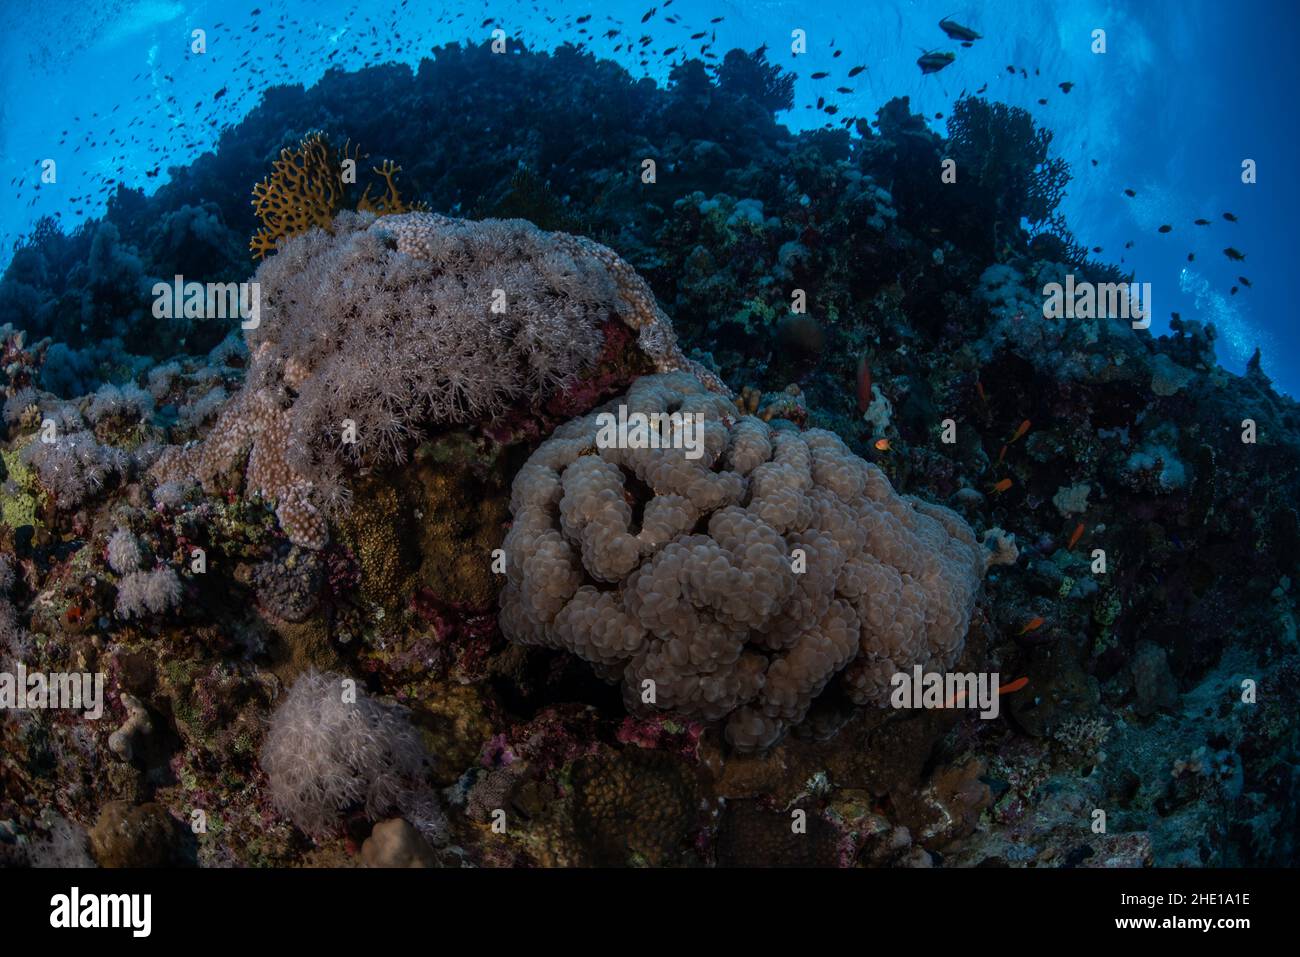 Bubble coral (plerogyra sinuosa) and pulsing xenia (Heteroxenia) soft coral next to each other in the red sea, Egypt. Stock Photo